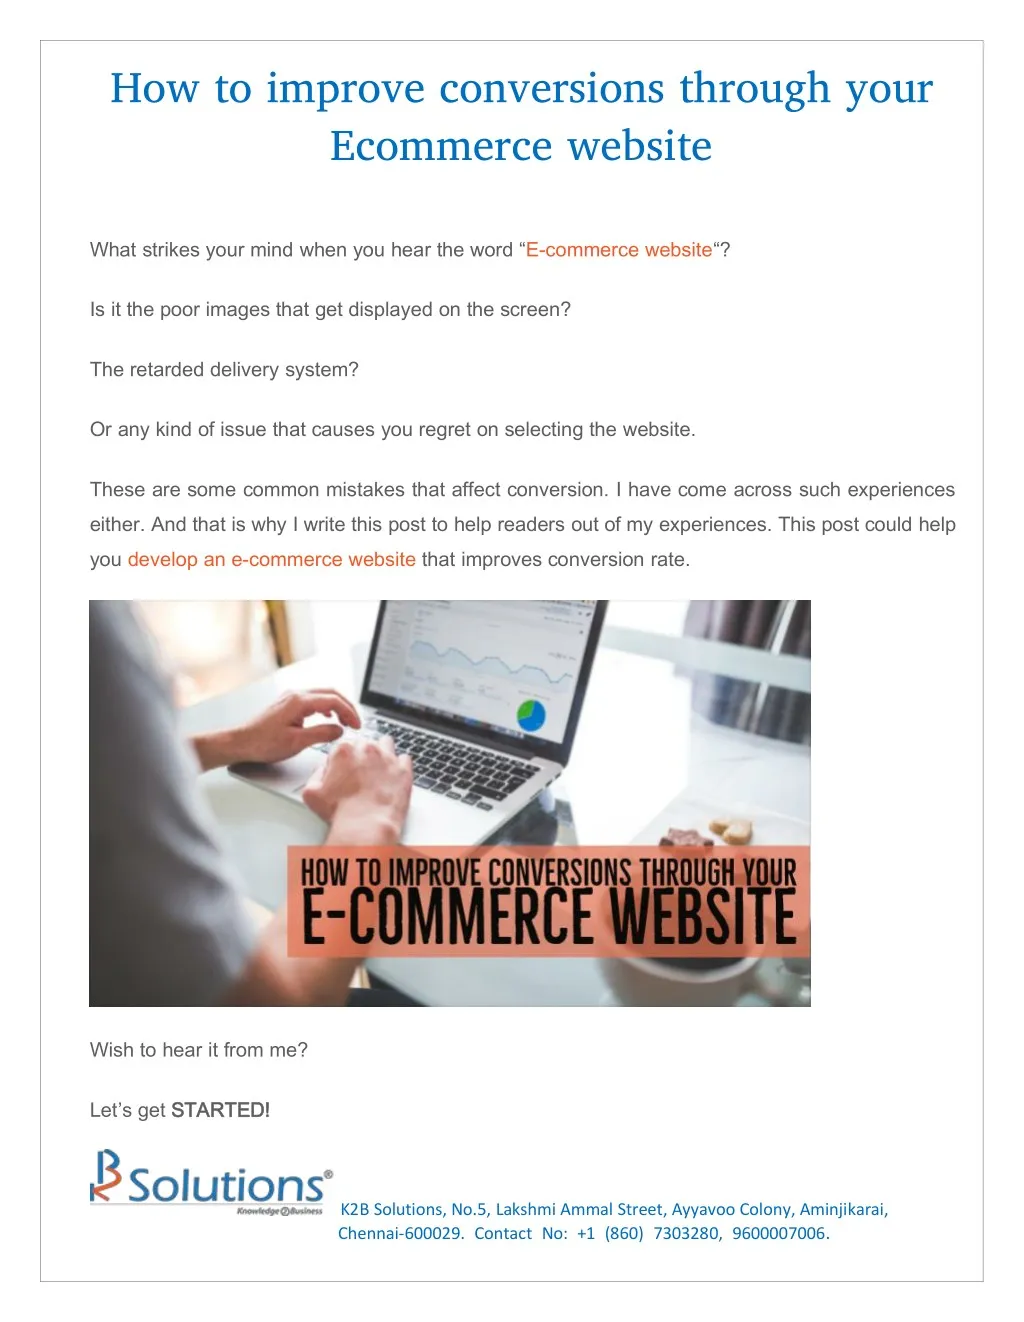 how to improve conversions through your ecommerce